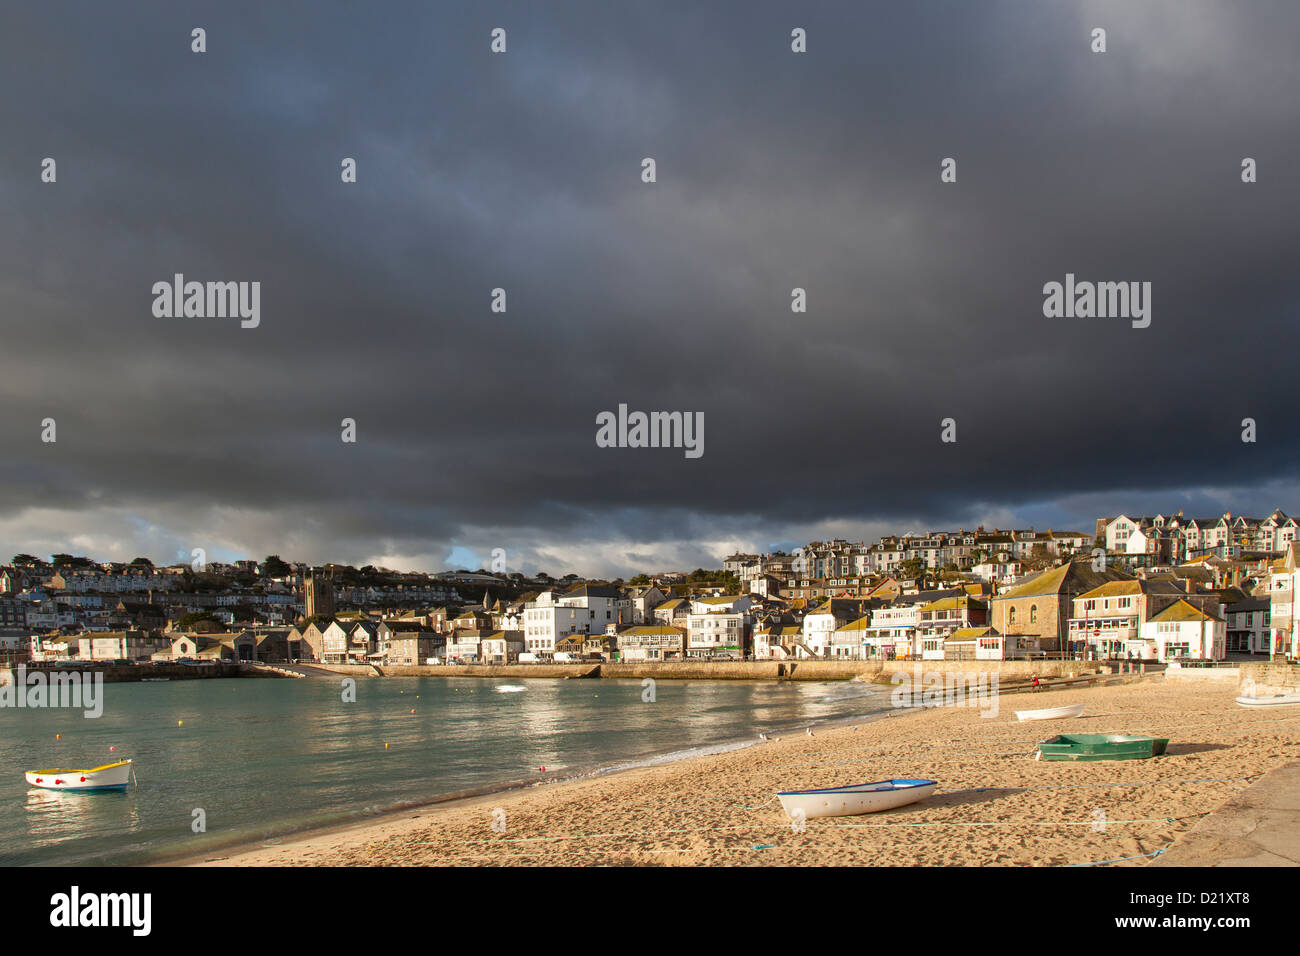 Early morning winter light illuminates buildings around St Ives harbour, whilst dark rain clouds provide an atmospheric backdrop Stock Photo